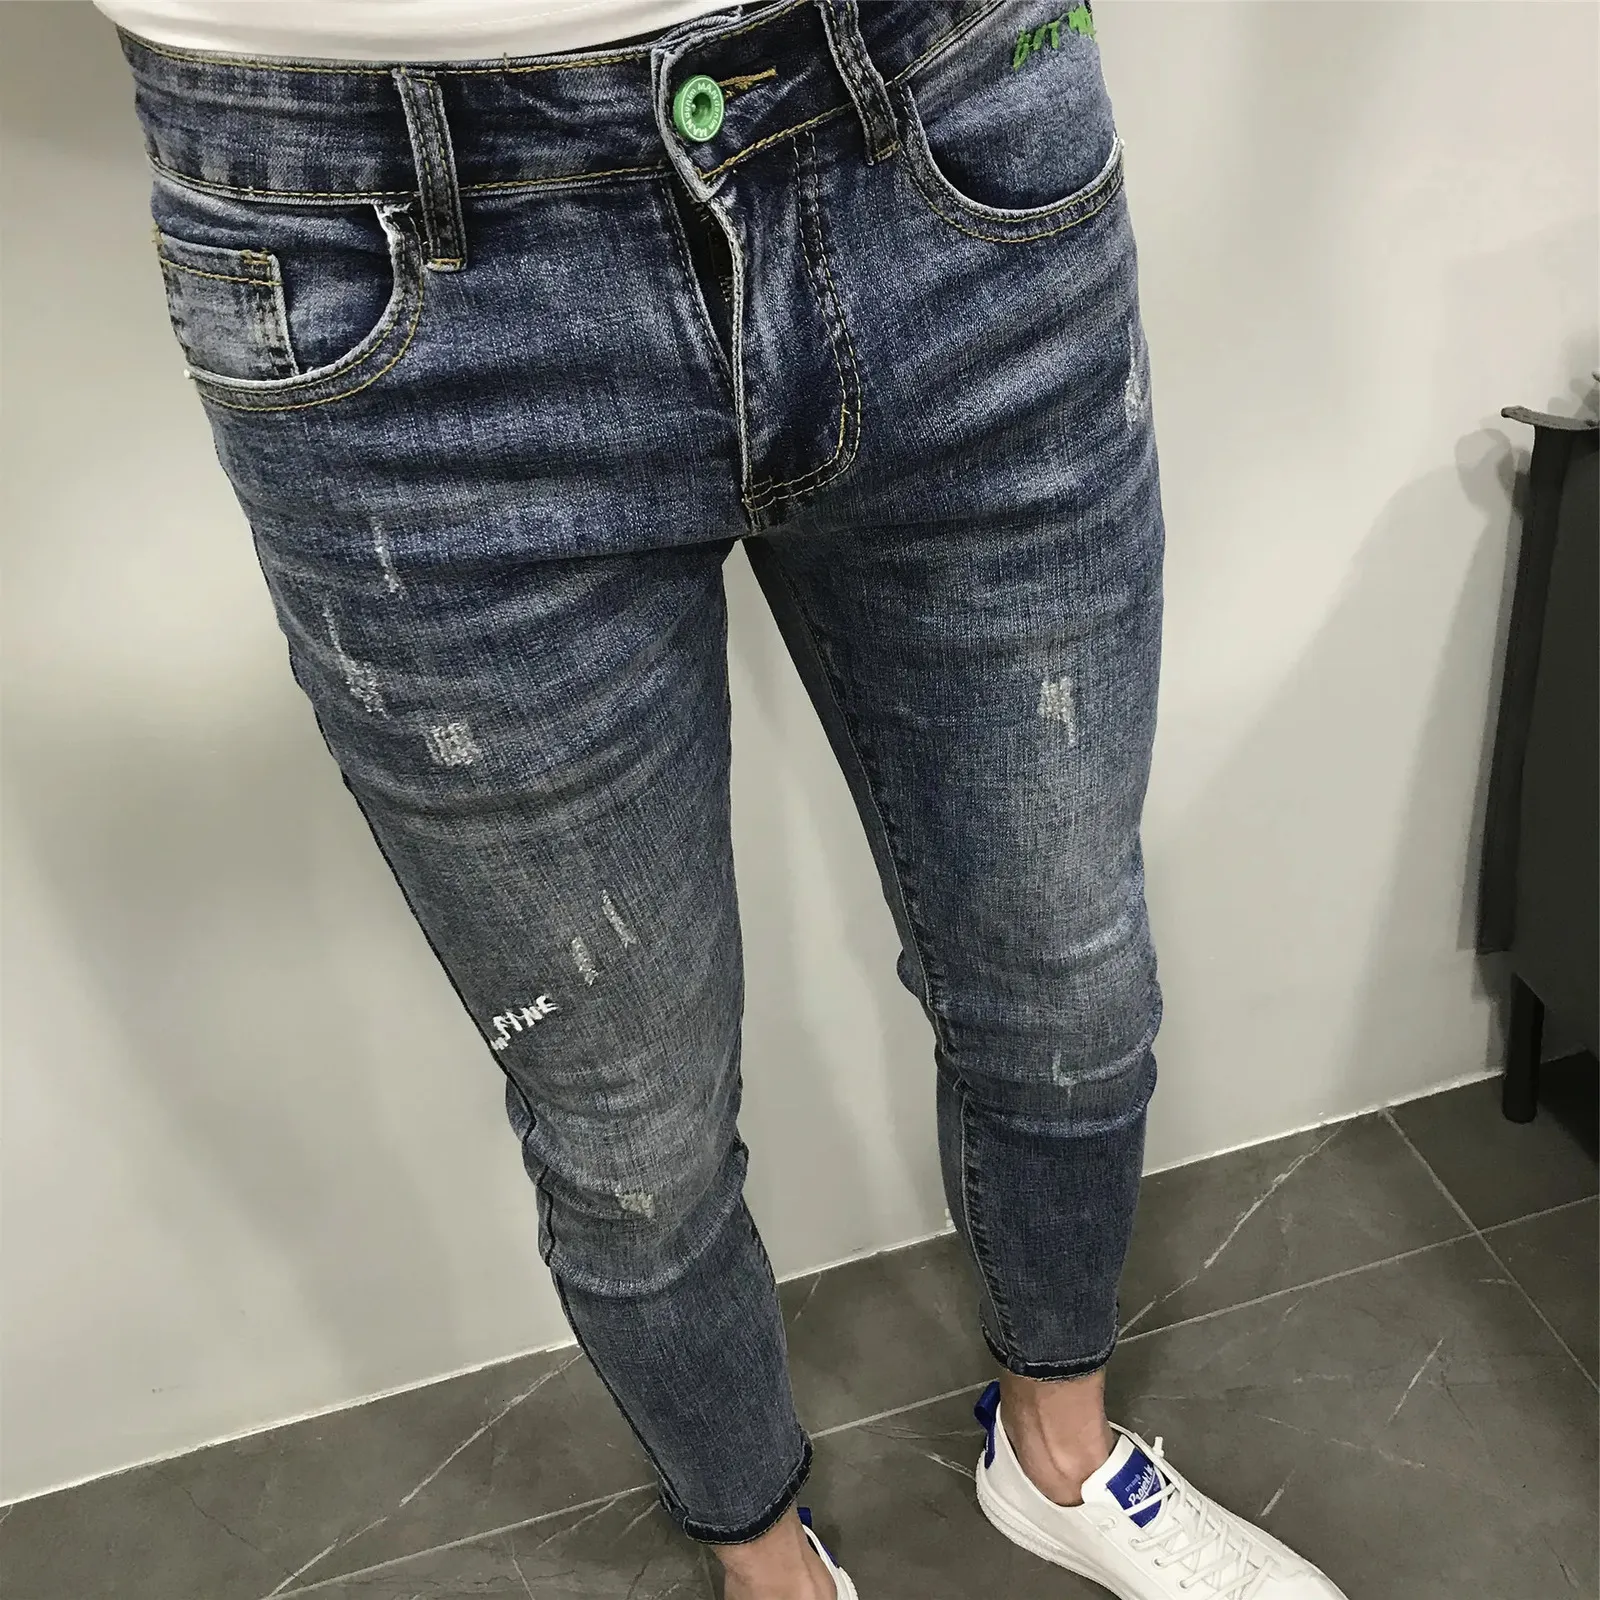 European Mens Skinny Jeans: Ankle Length, Grey Stripe Denim For Biker Style  210723 IOq UAREDs 2s S 5ABR From Aaa_luxury05, $67.82 | DHgate.Com